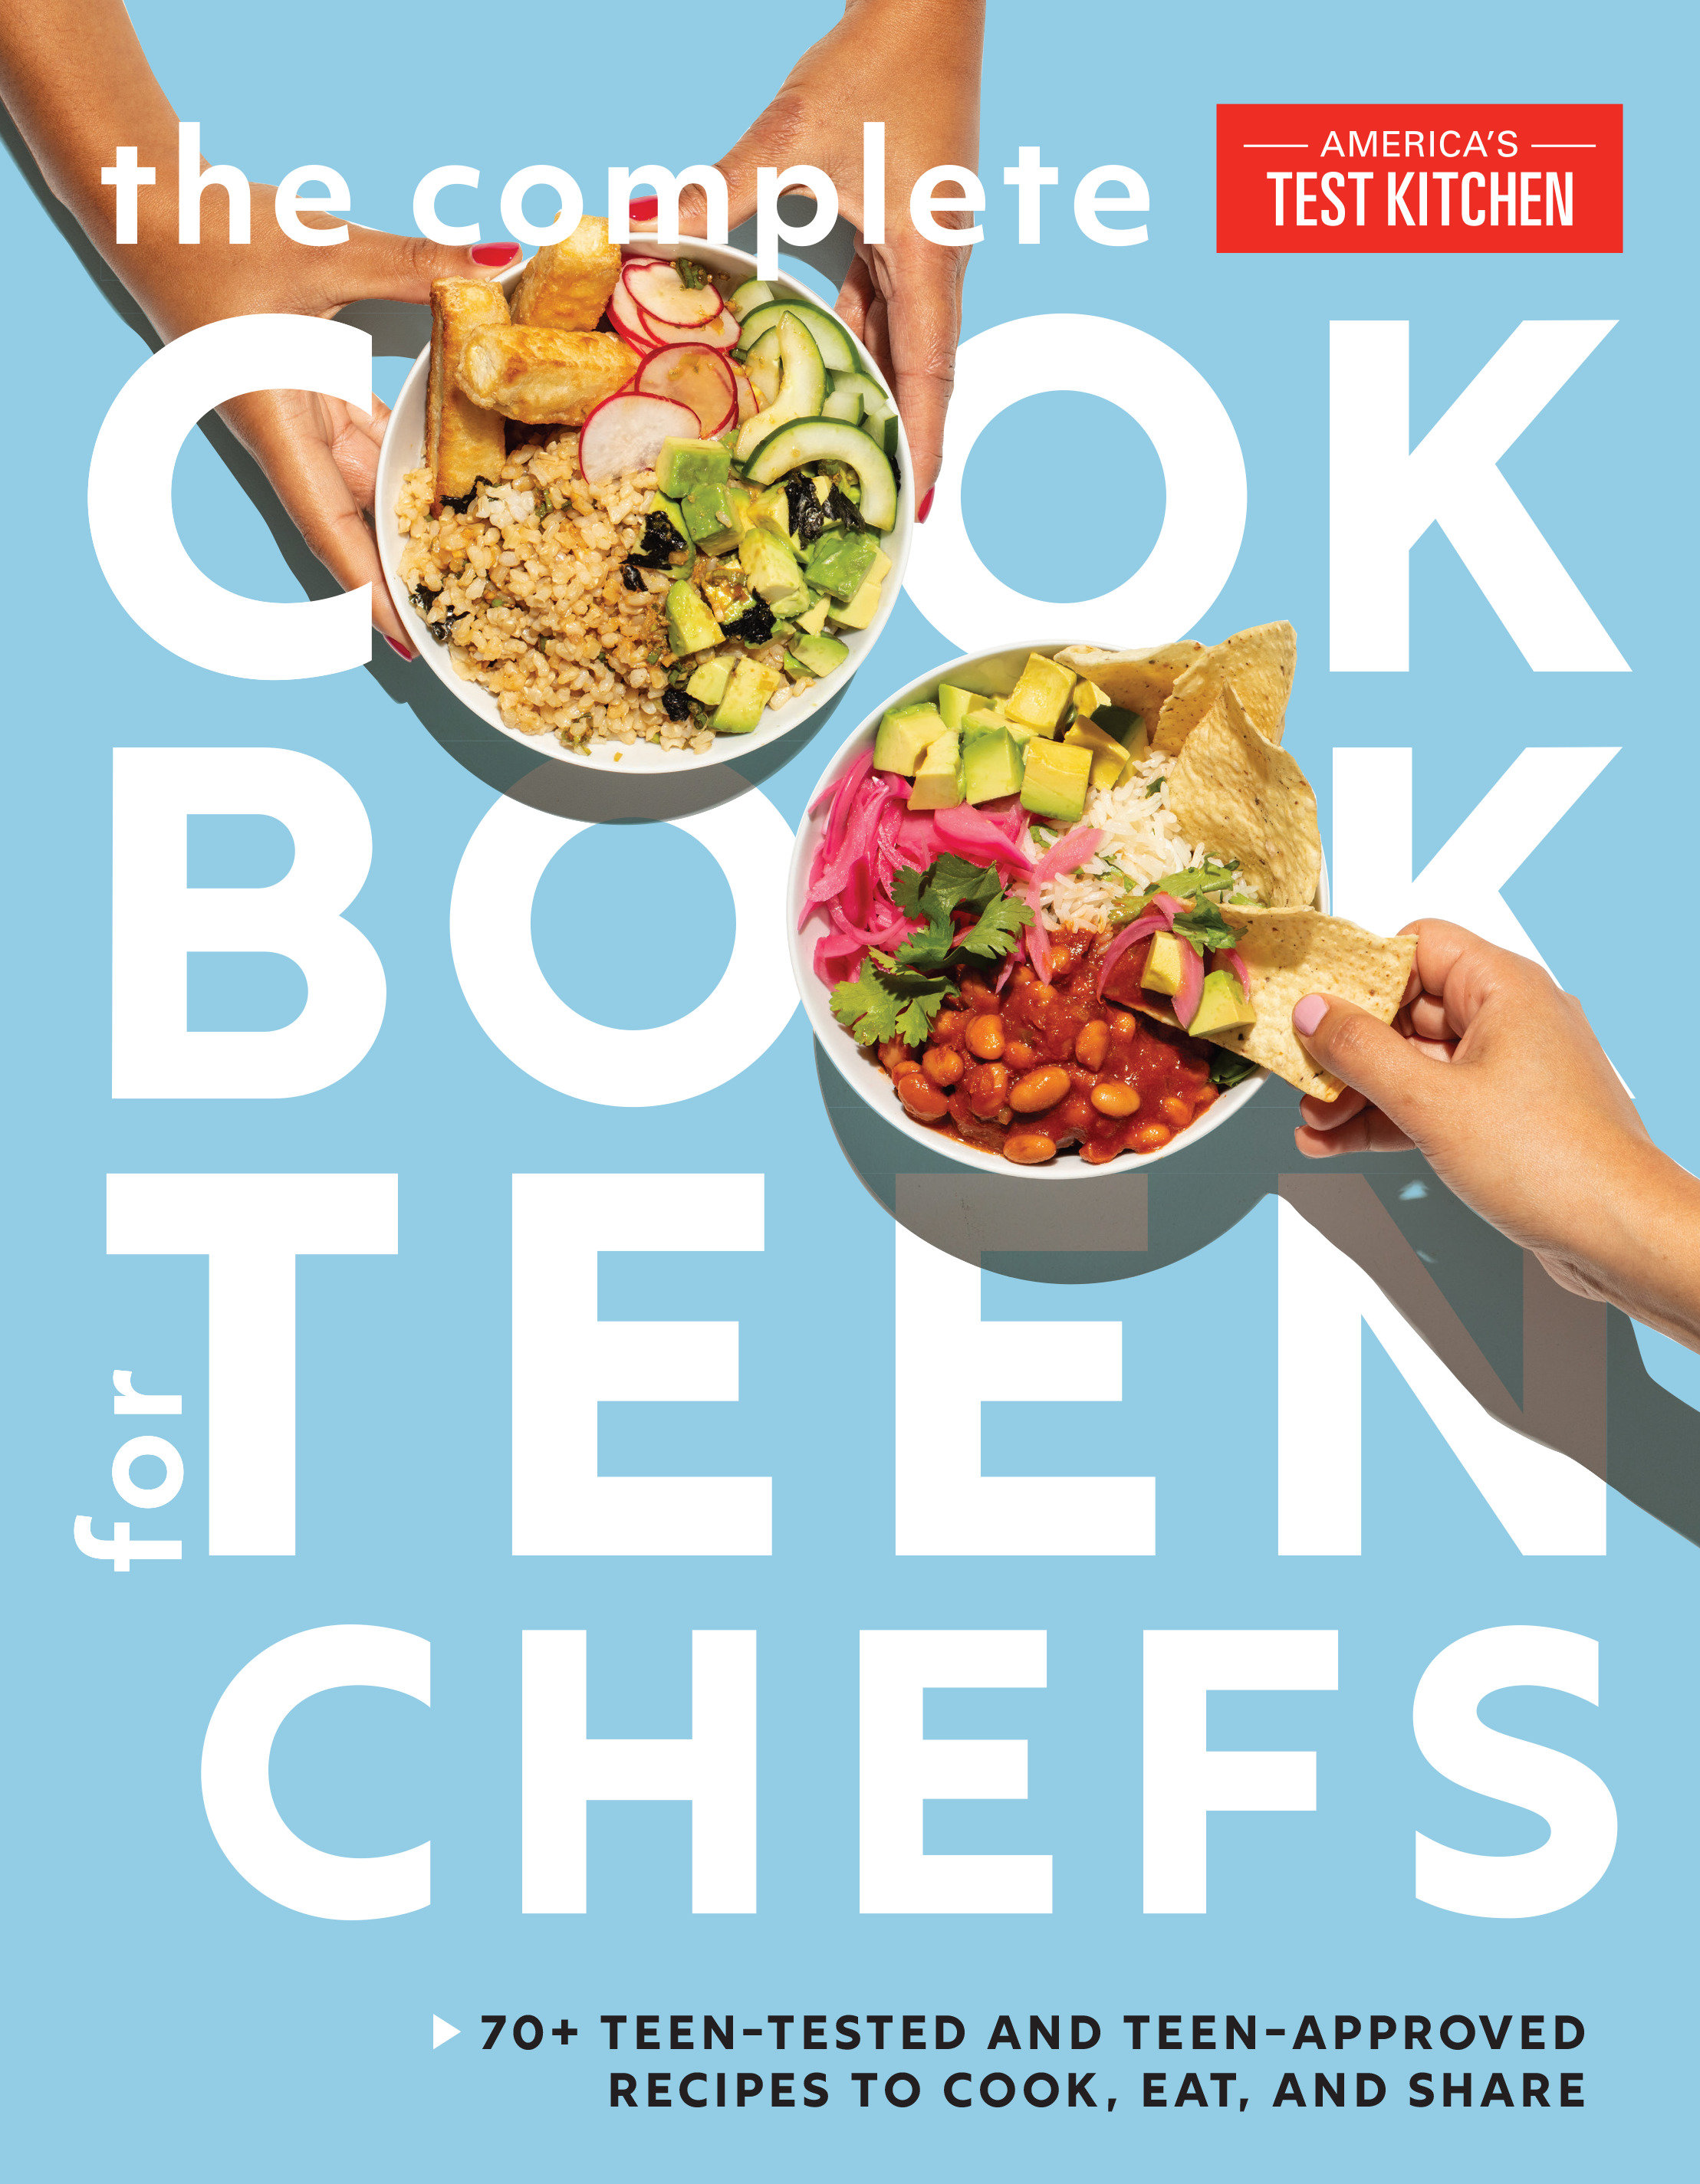 The Complete Cookbook for Teen Chefs (Hardcover Book)